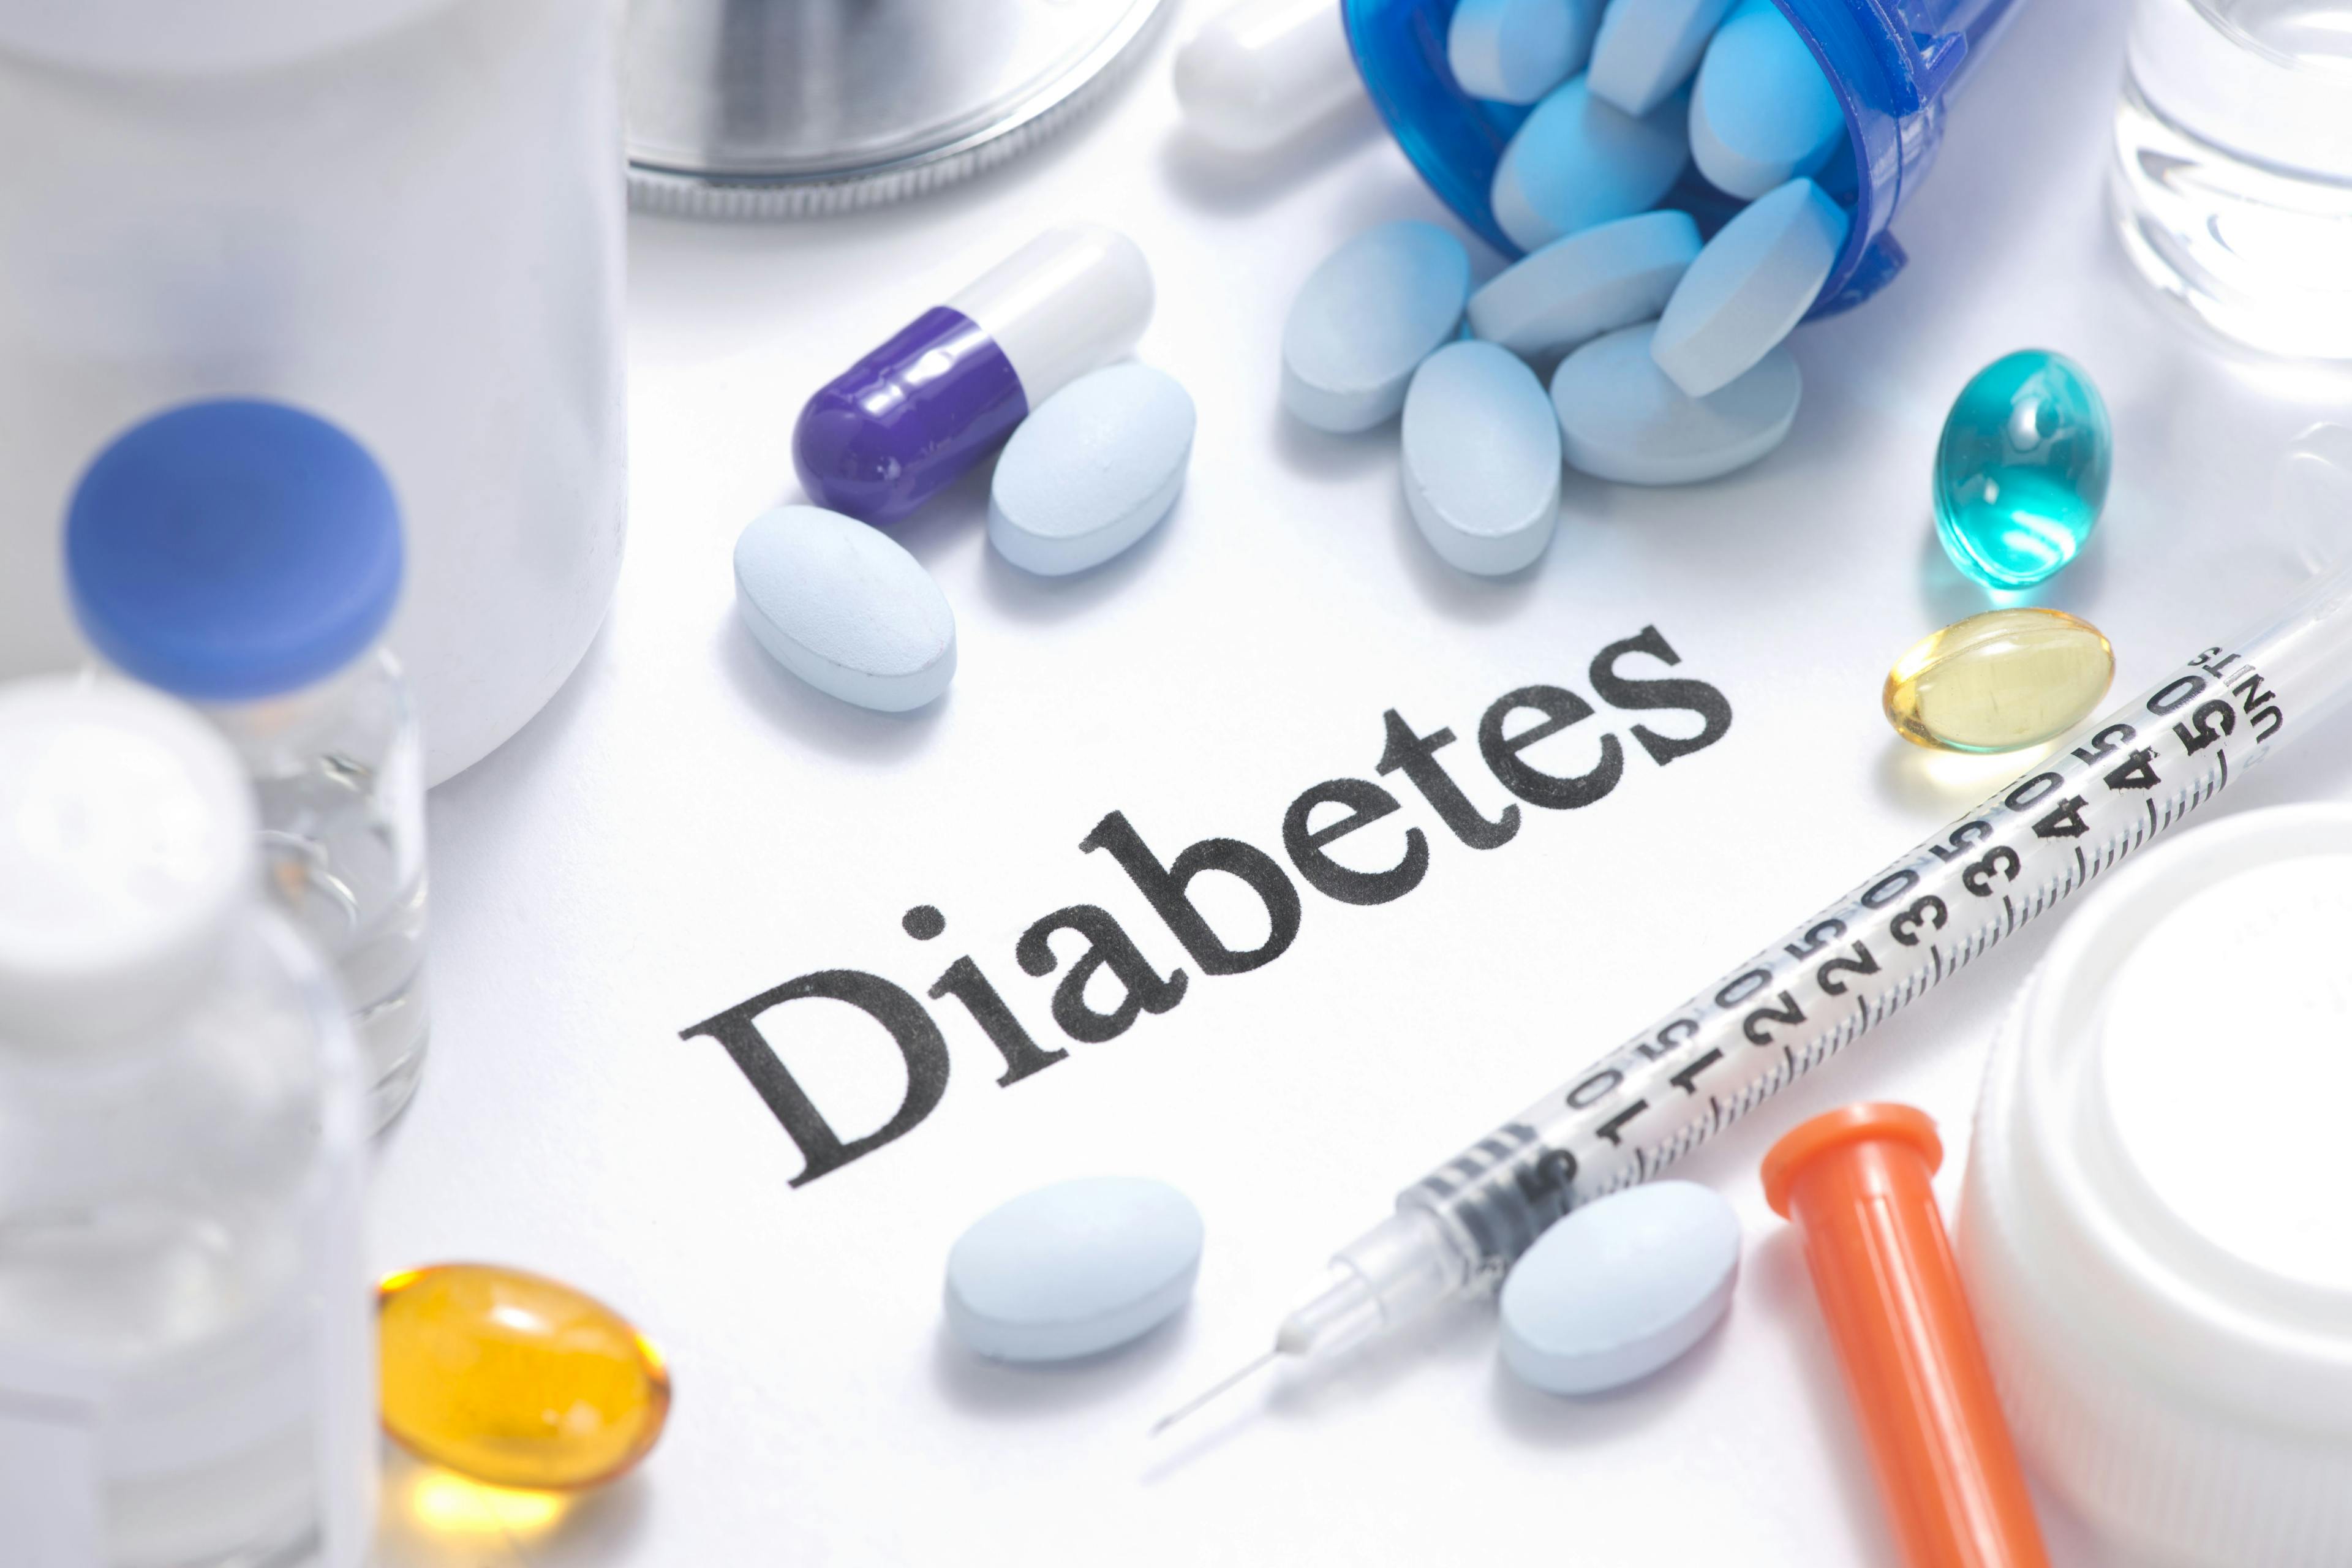 Diabetes-related stock imagery (Couresty: Fotolia)